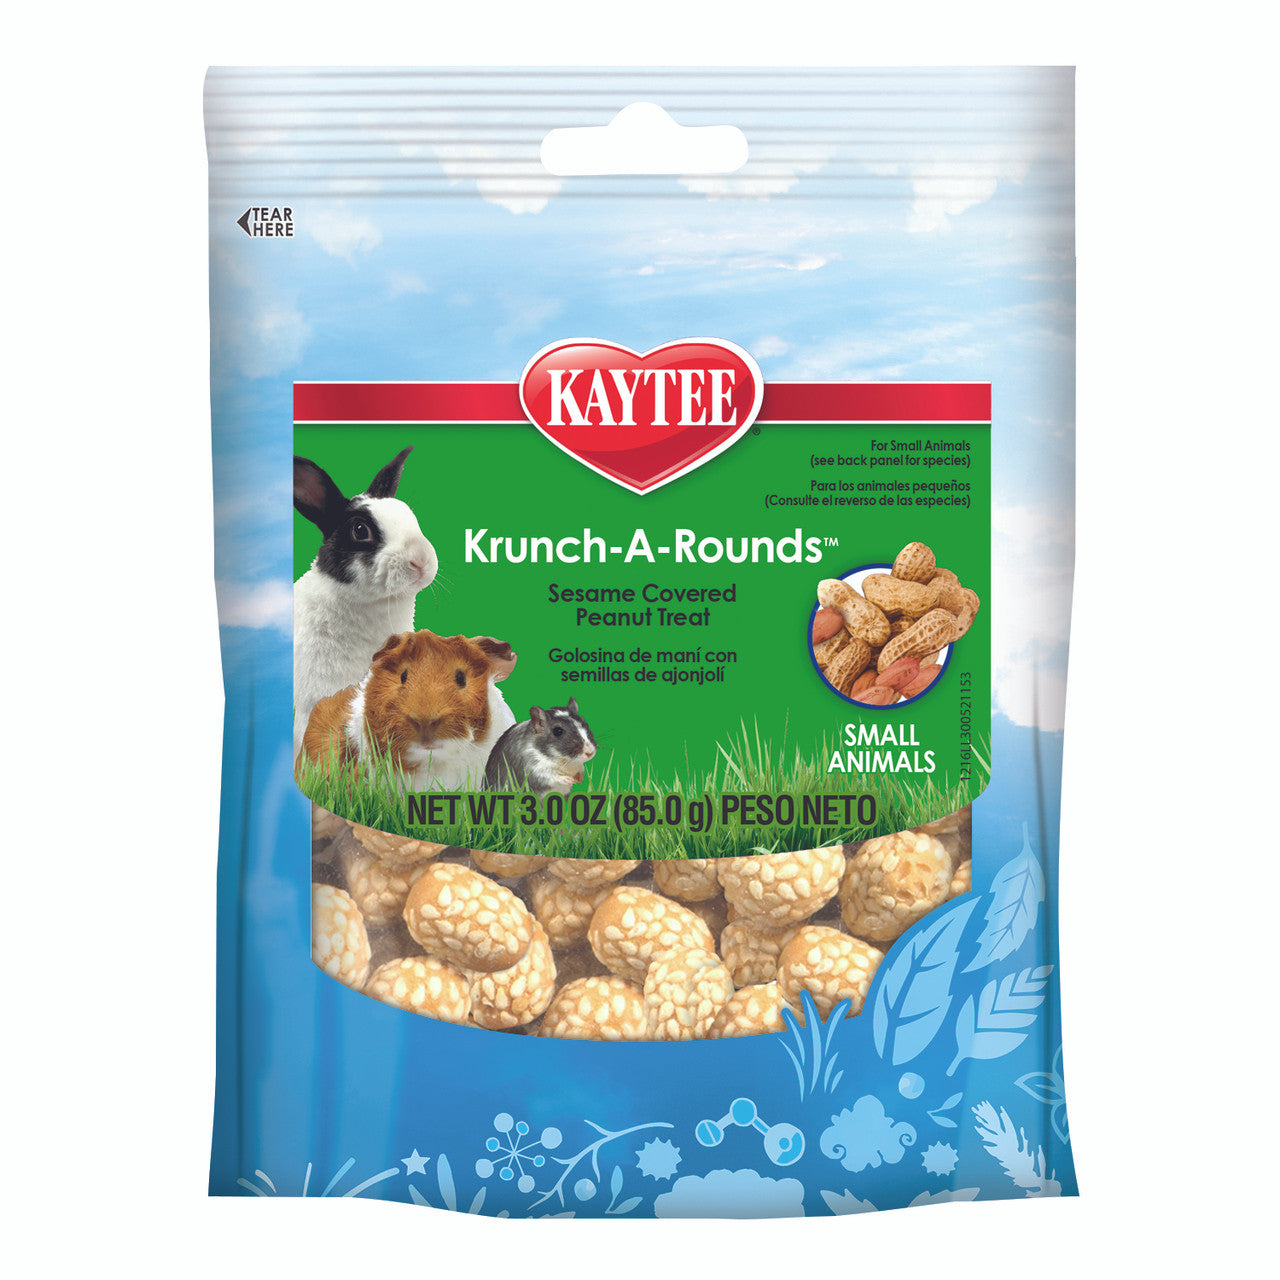 Kaytee Krunch-A-Rounds Treat for Small Animals 3 oz